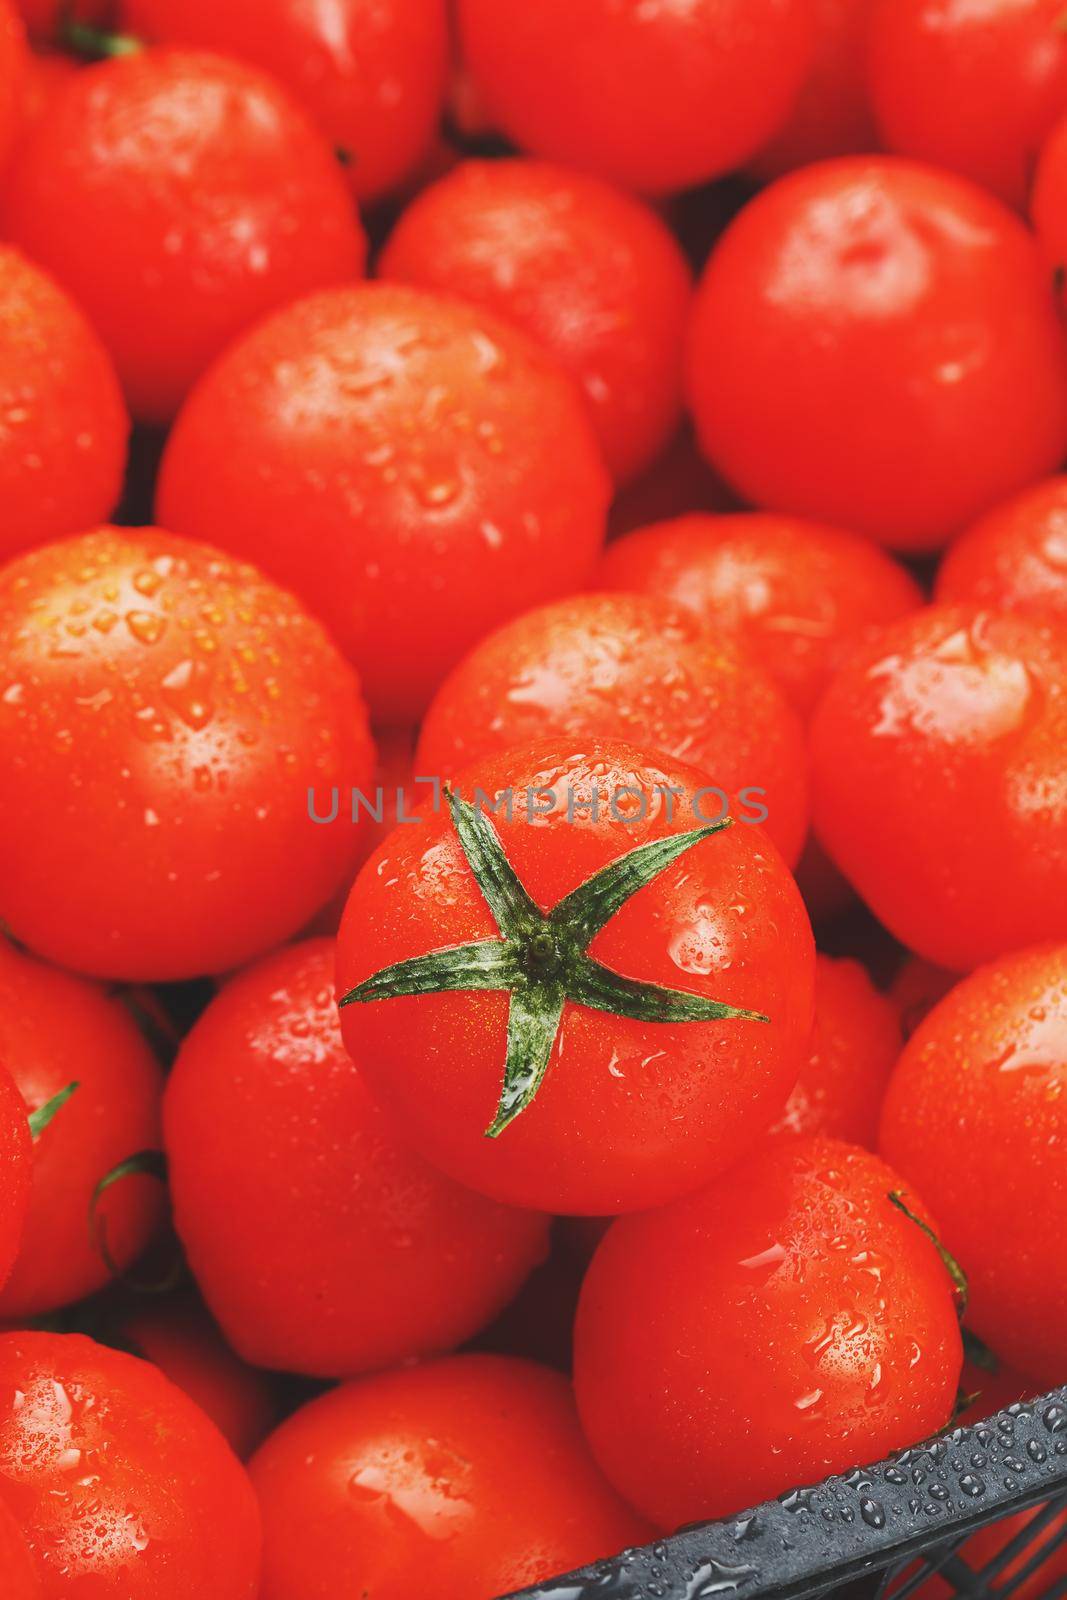 Lots of fresh ripe tomatoes with drops of dew. Close-up background with texture of red hearts with green tails. Fresh cherry tomatoes with green leaves. Background red tomatoes. Group of juicy ripe fruit. Vertical frame close-up